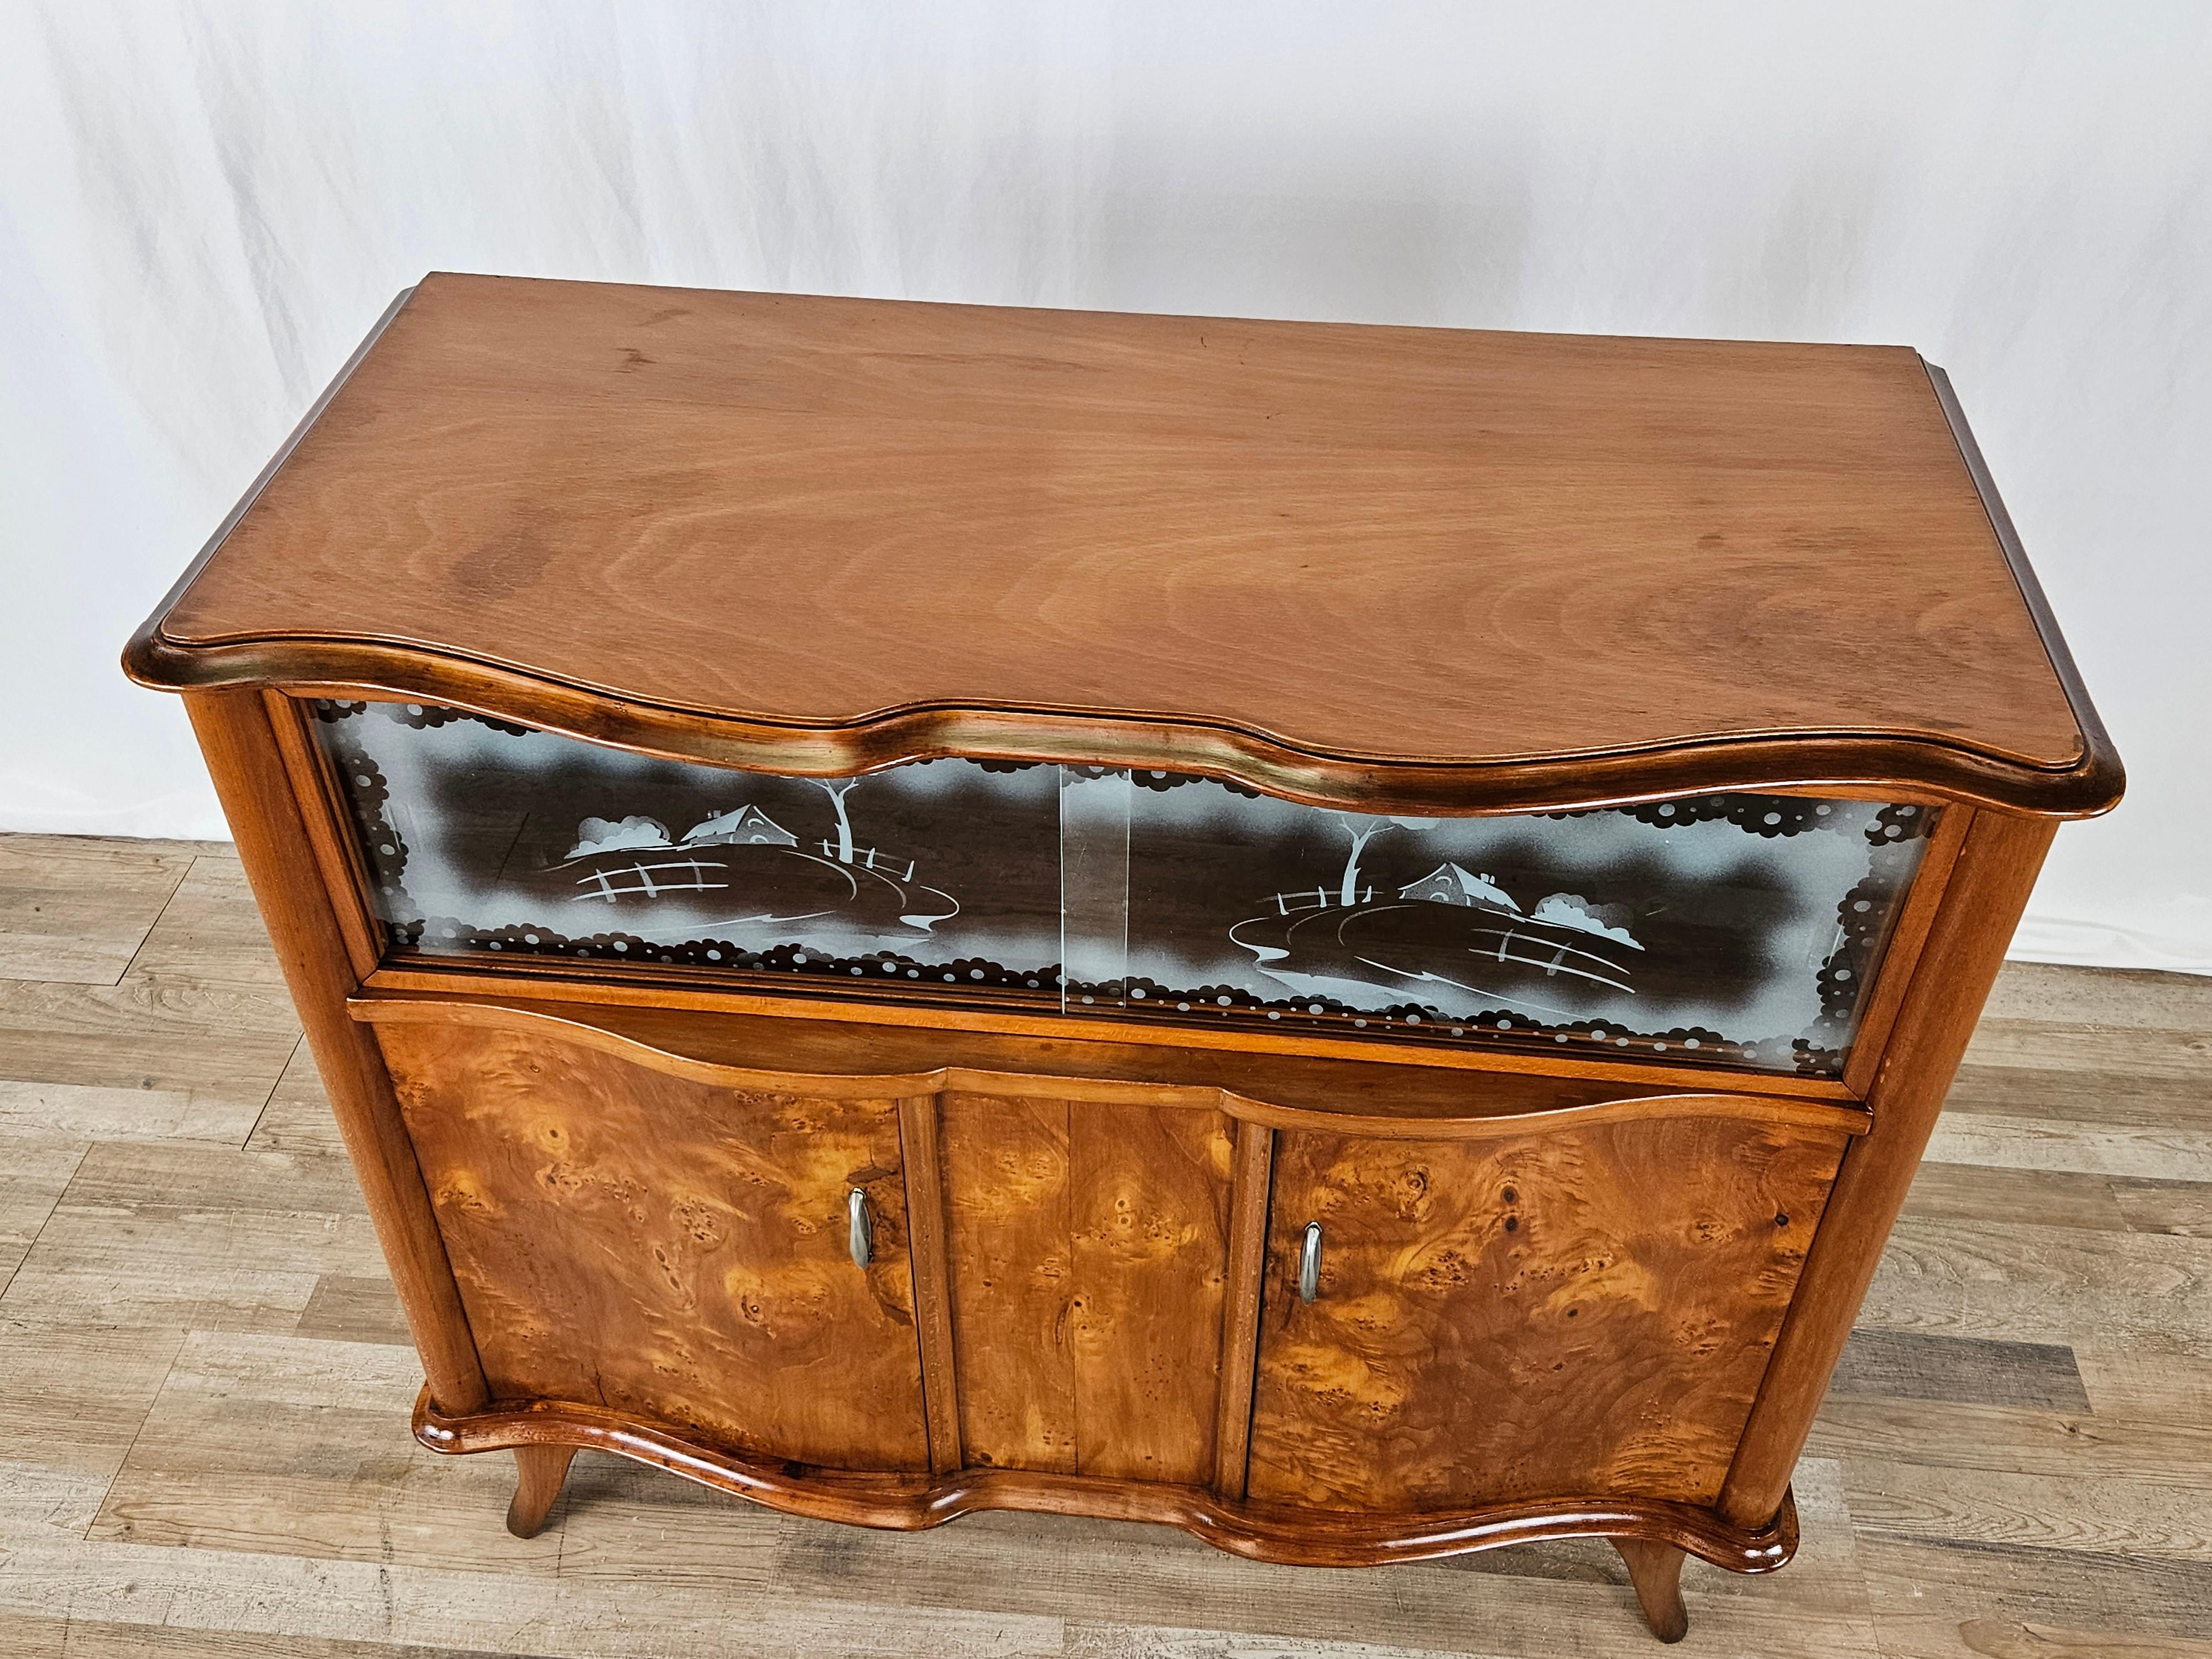 Small sideboard or cabinet in blond walnut burl, mid-20th century Italian manufacture.

Refined and lively, it features a double door with a single internal compartment.
Two sliding glass panes with frosted decorations covering an additional